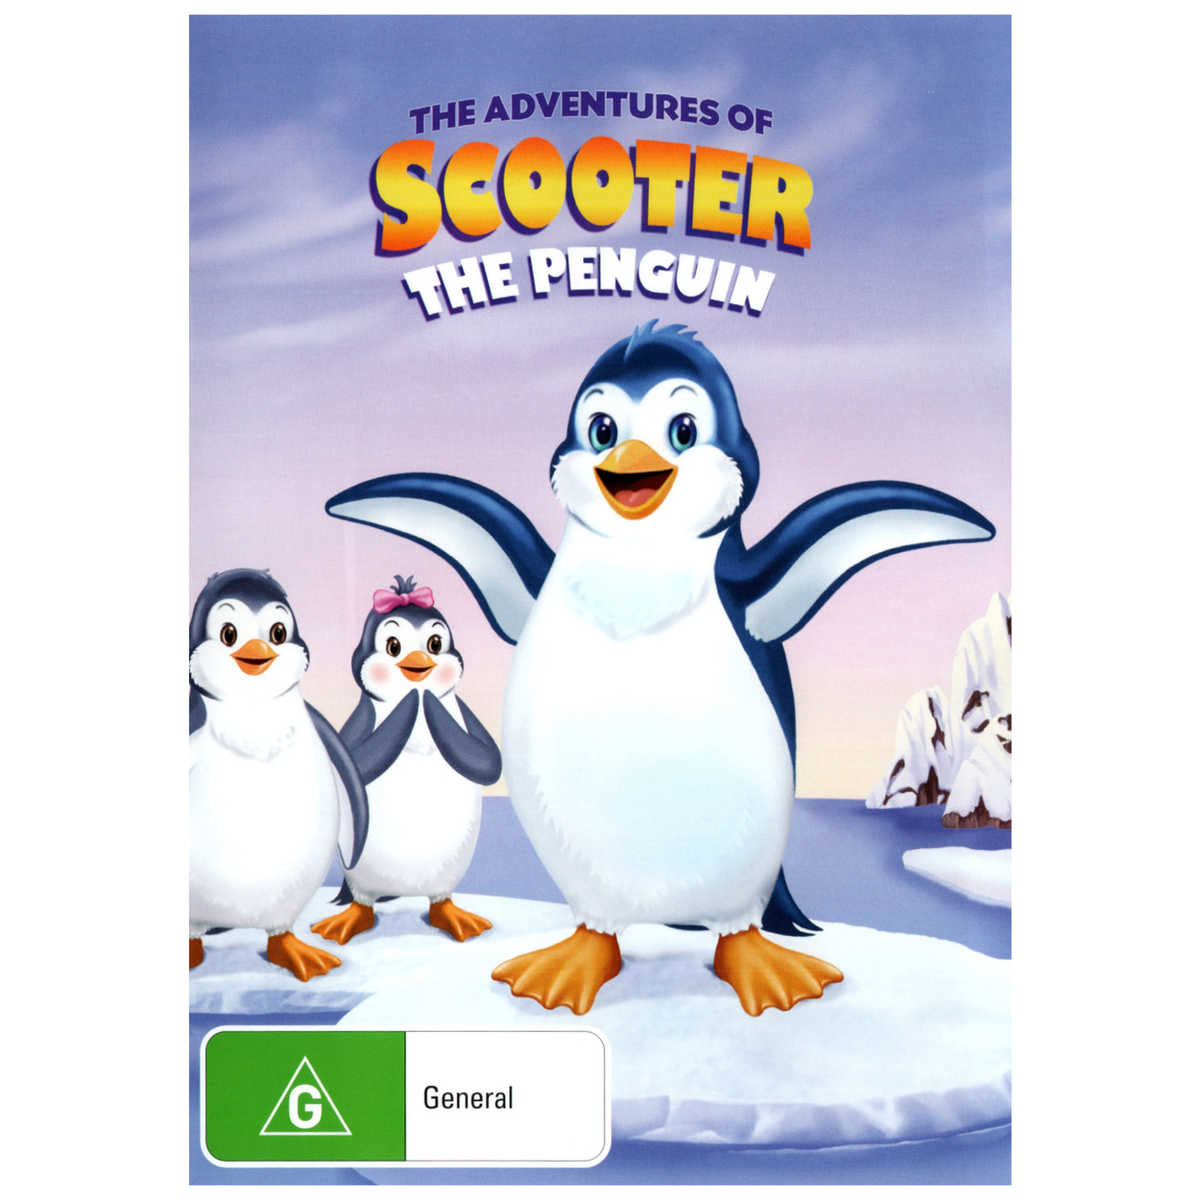 The Adventures of Scooter the Penguin (2012) Screenshot 1 